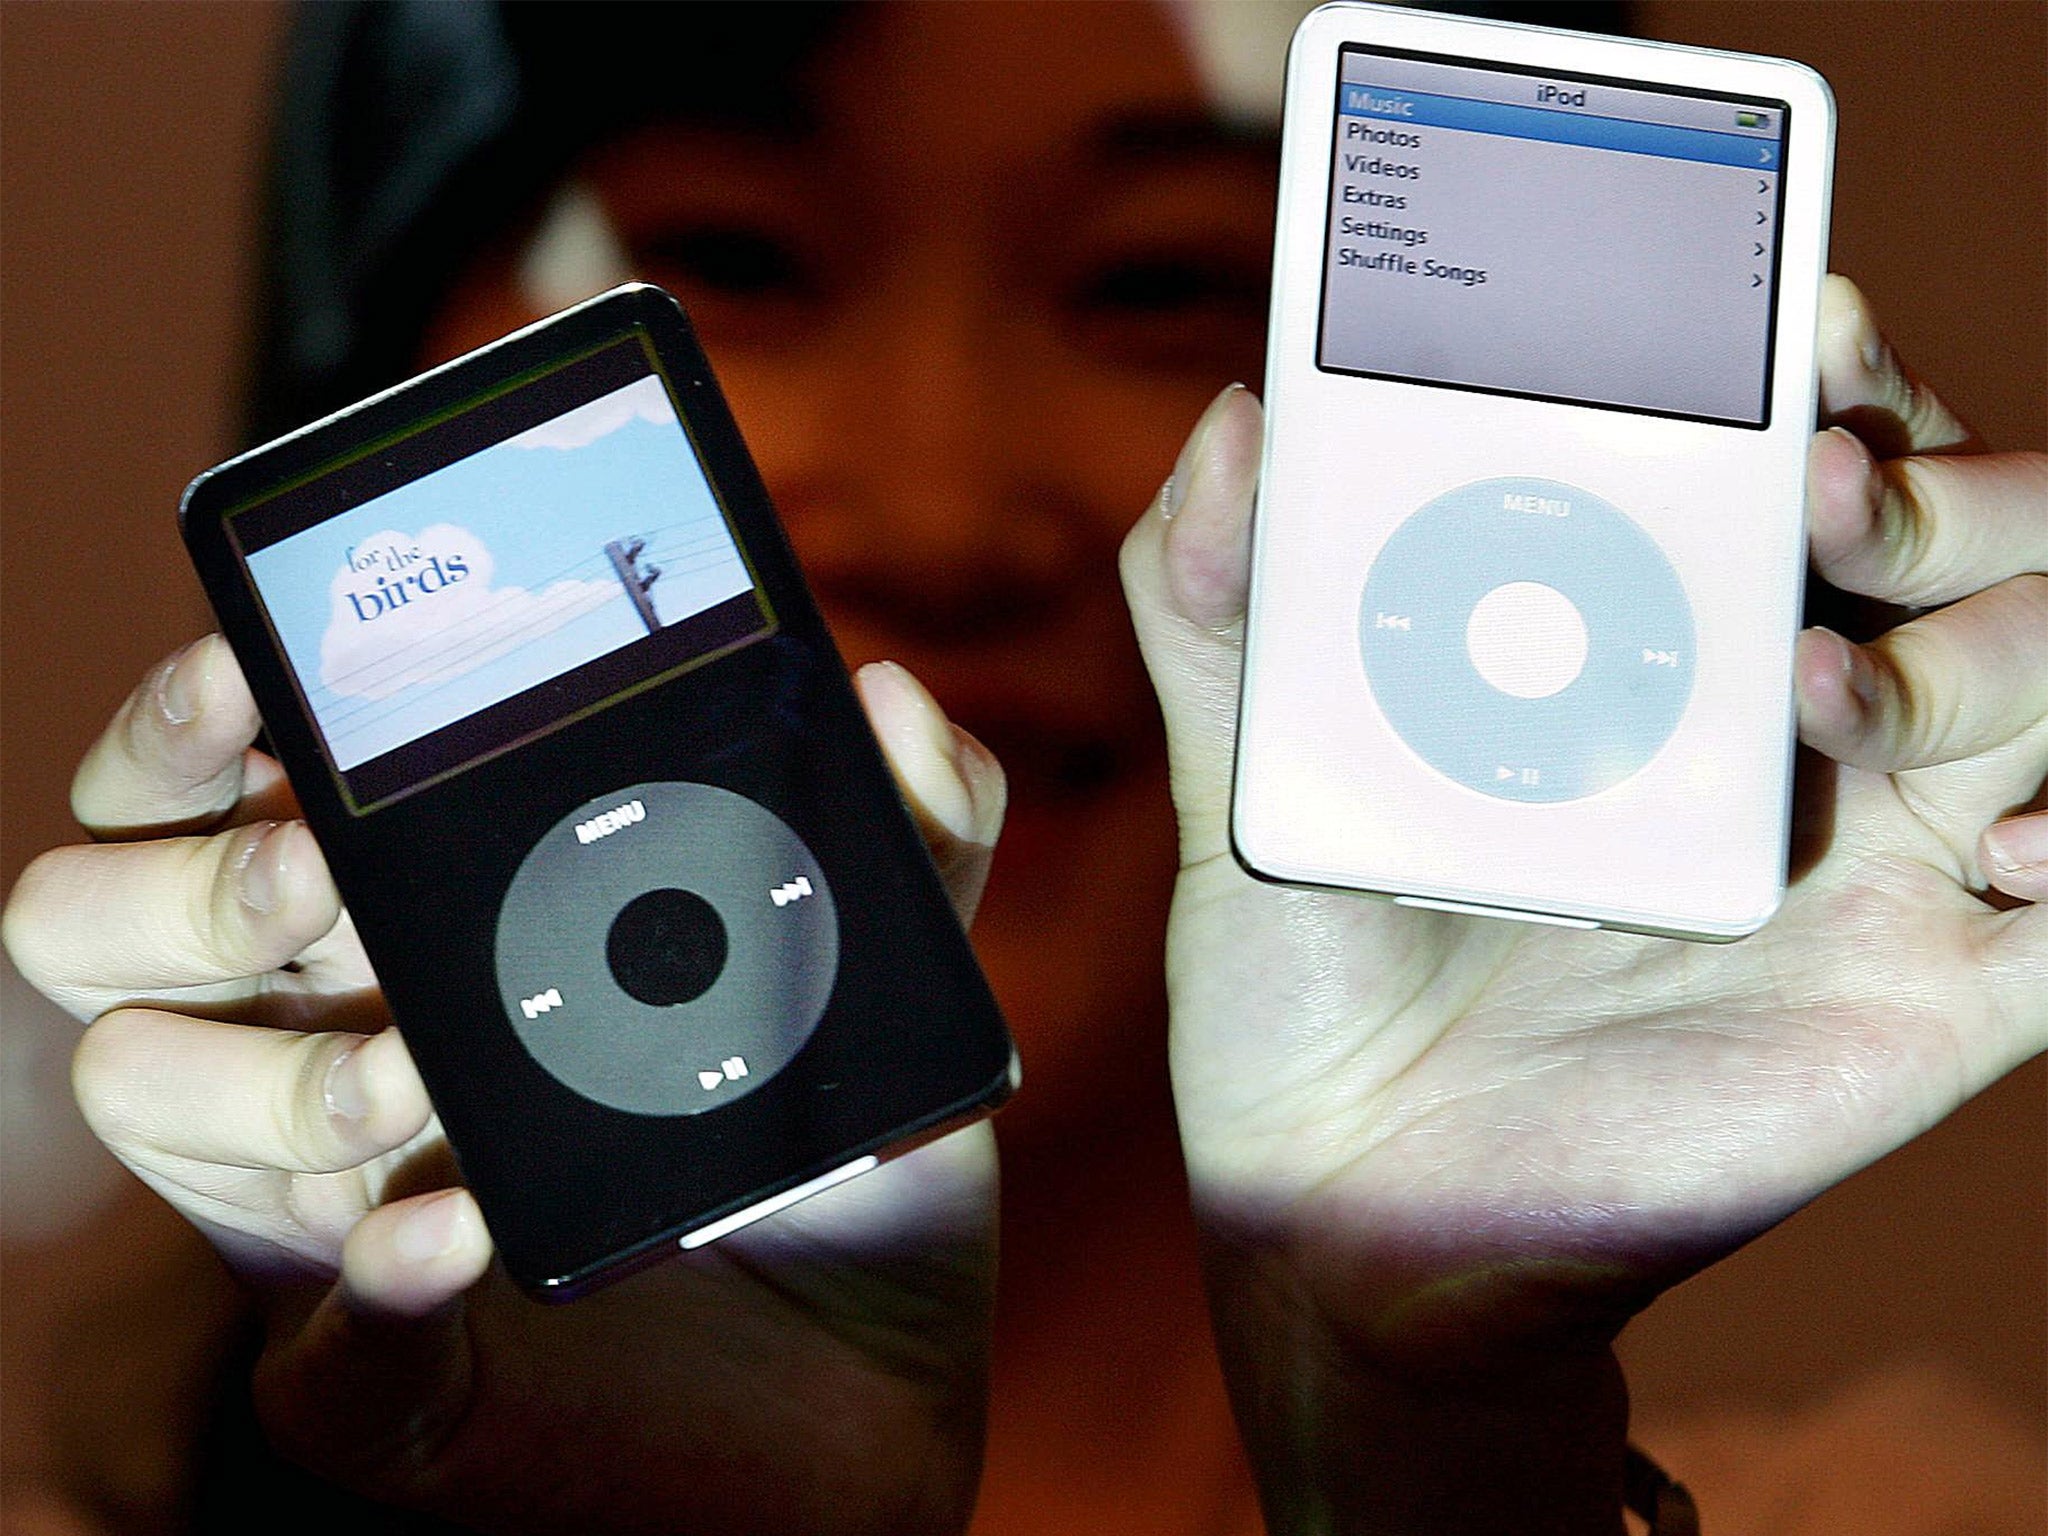 “Goodnight, sweet click-wheel,” said Pitchfork, the internet magazine, as it mourned the loss of the iPod Classic